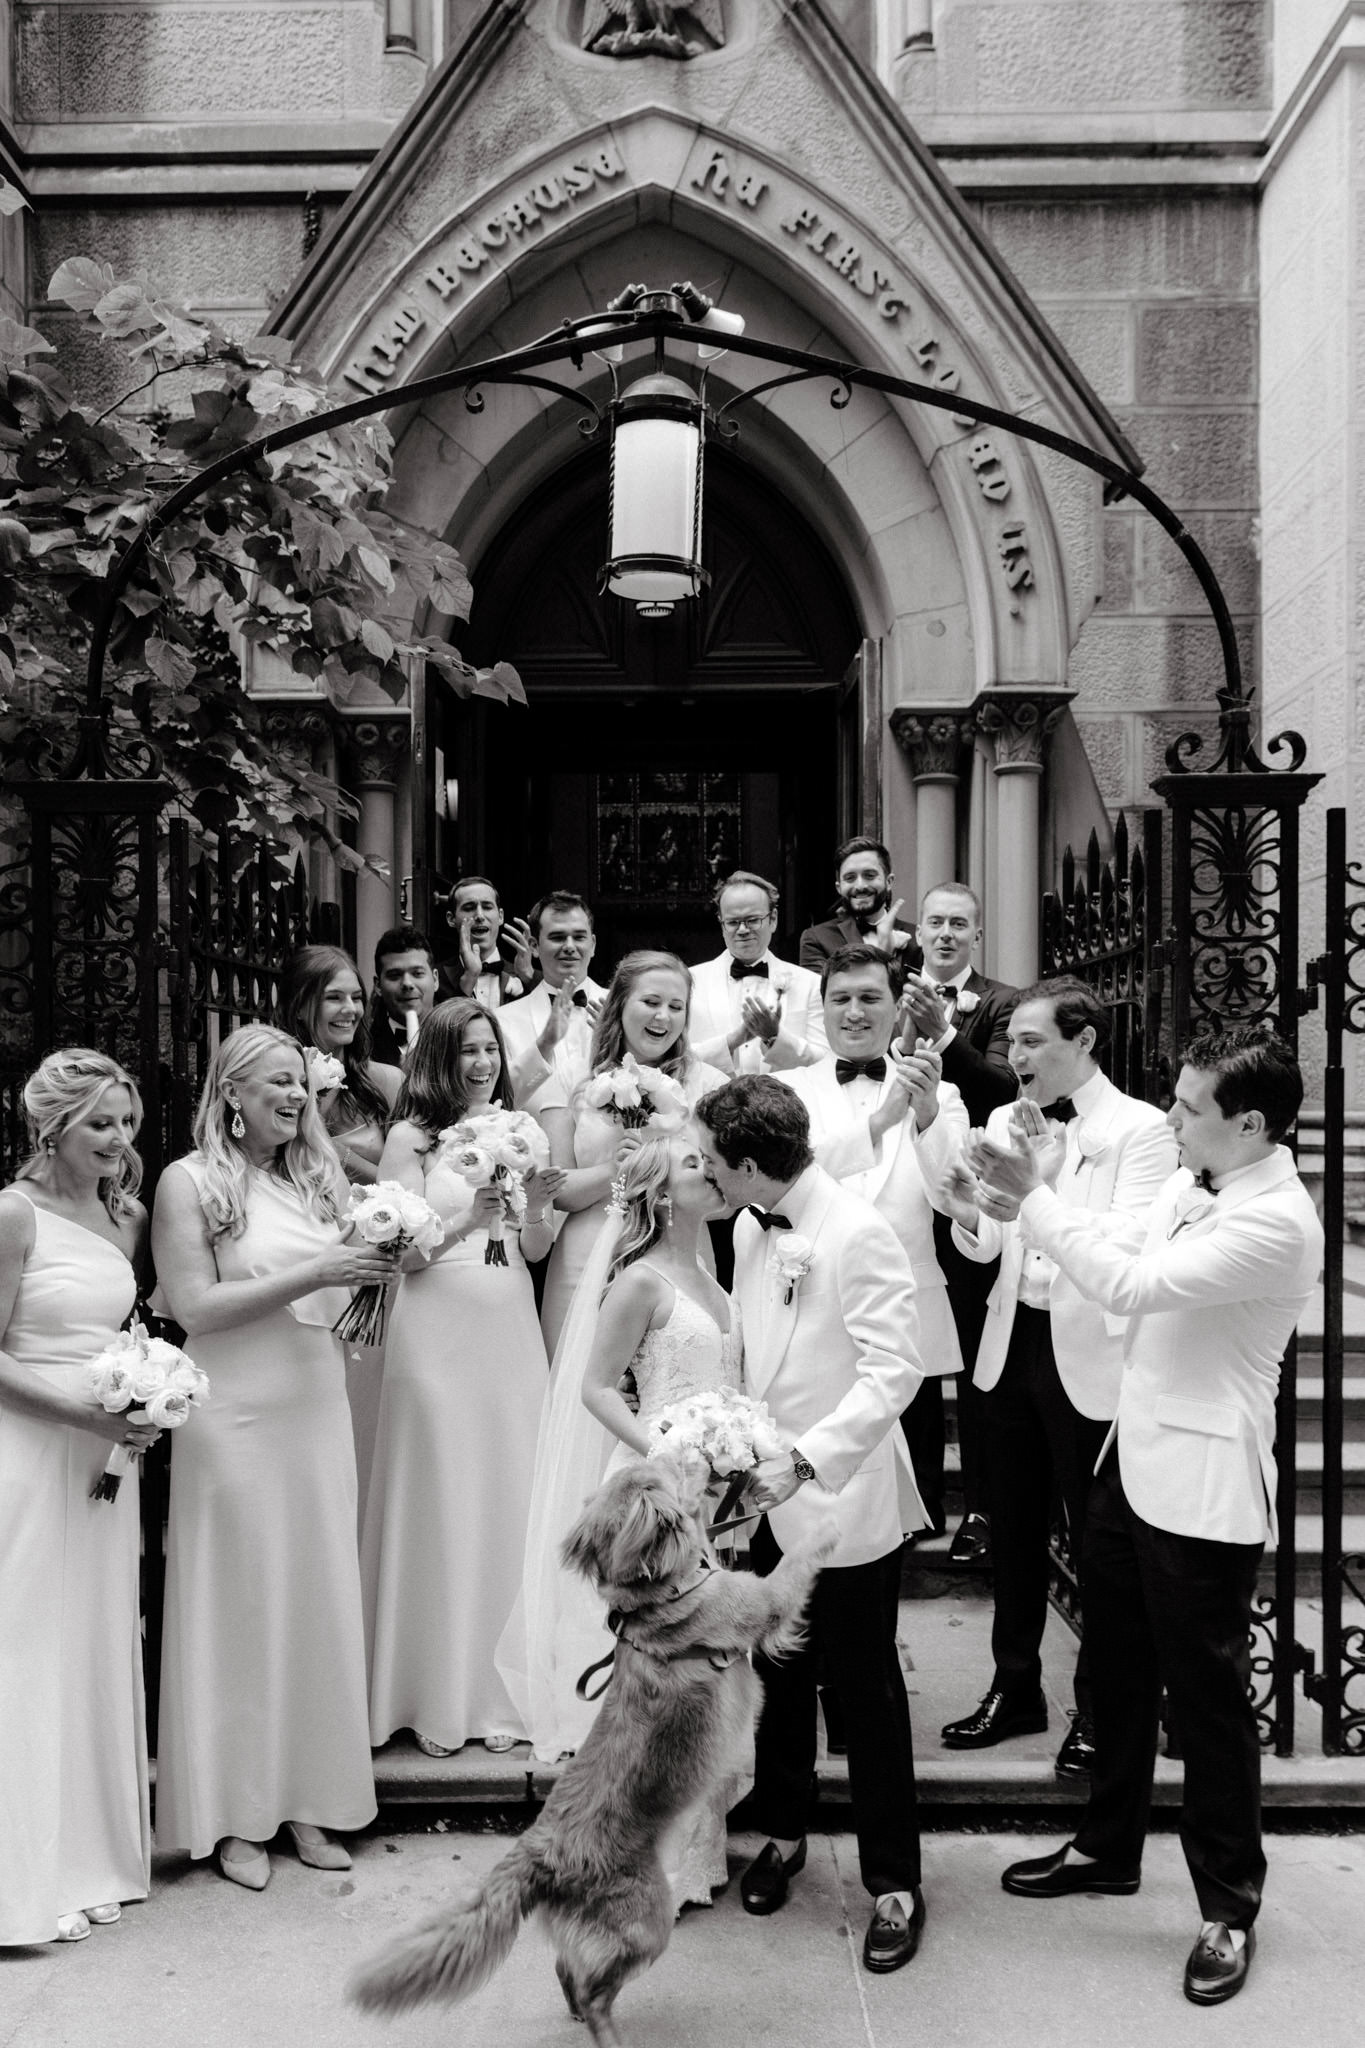 A dog jumps at a bride and groom kissing outside of a New York City wedding venue